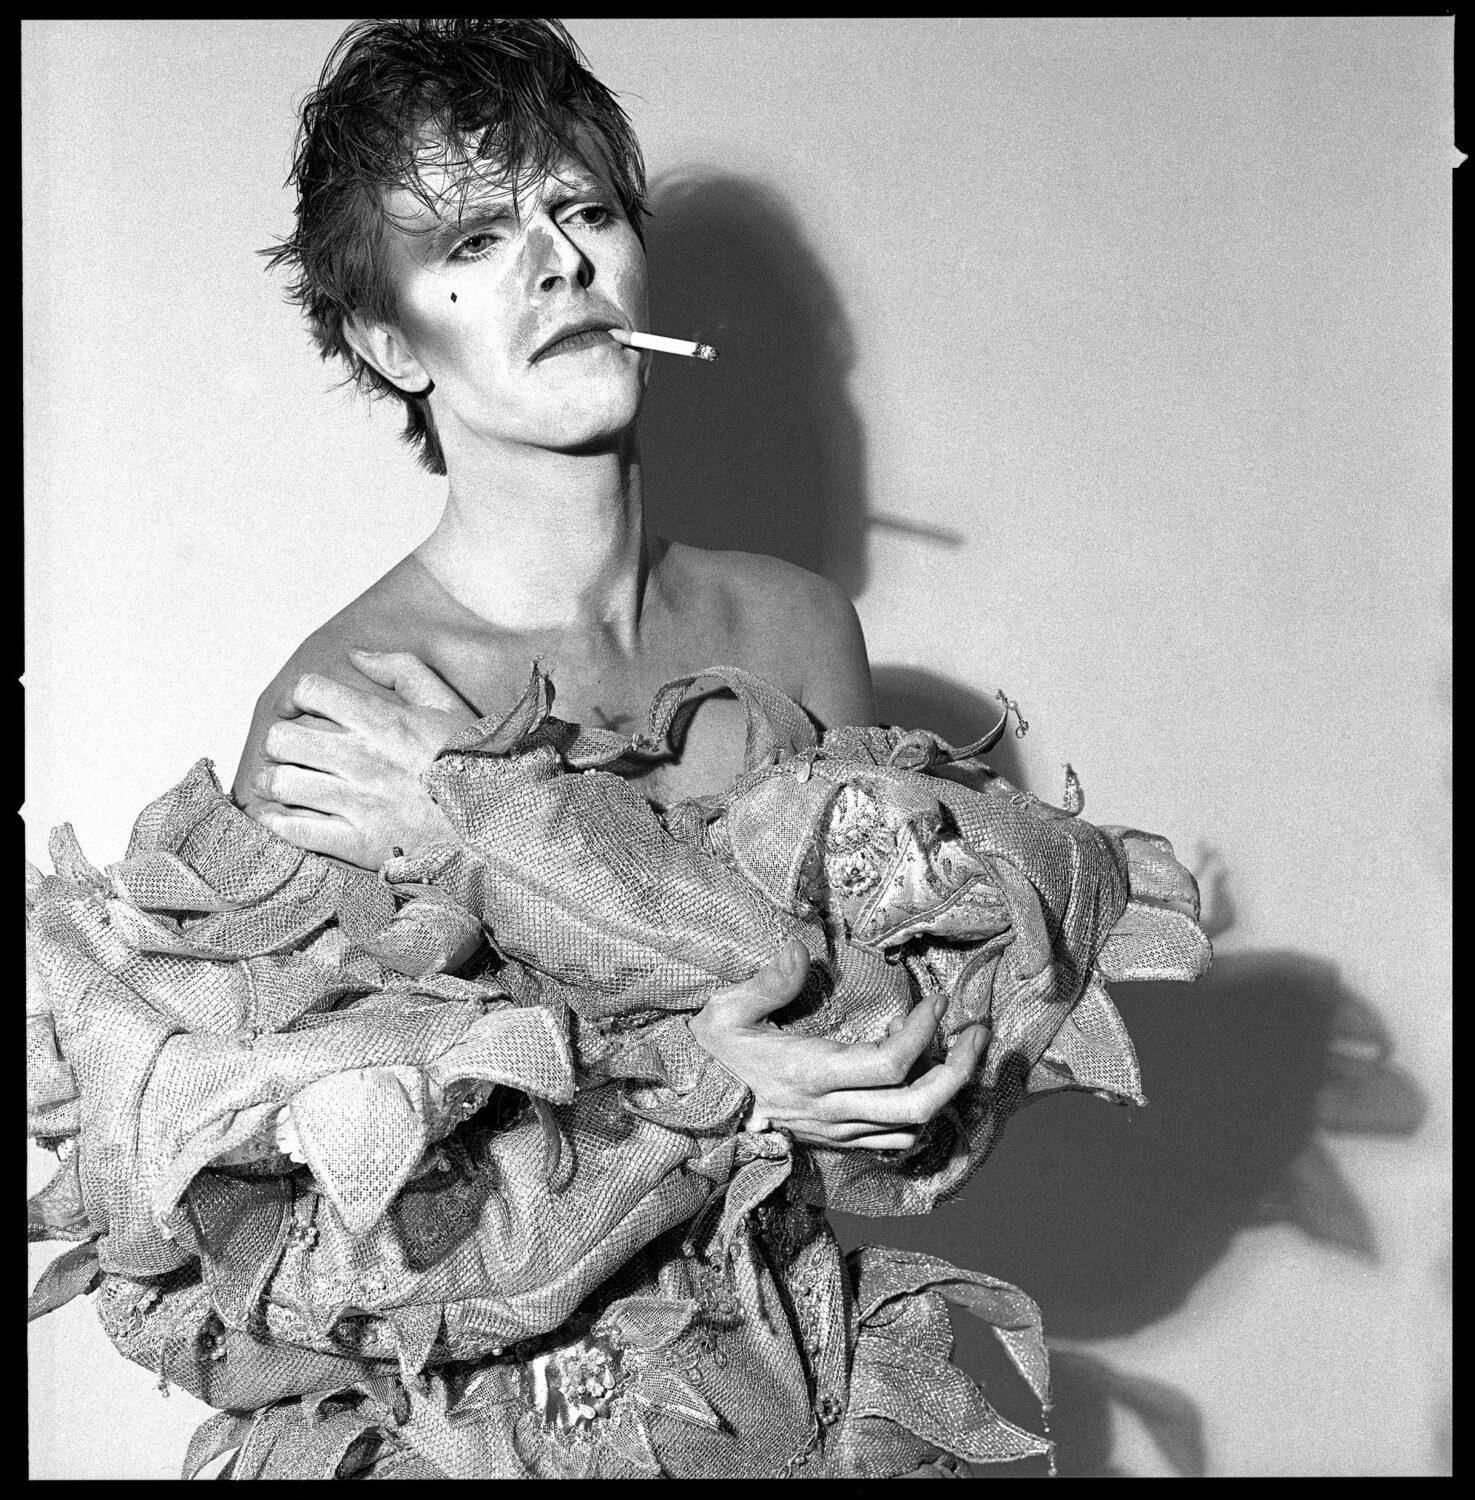 Brian Duffy: David Bowie (Scary Monster II)